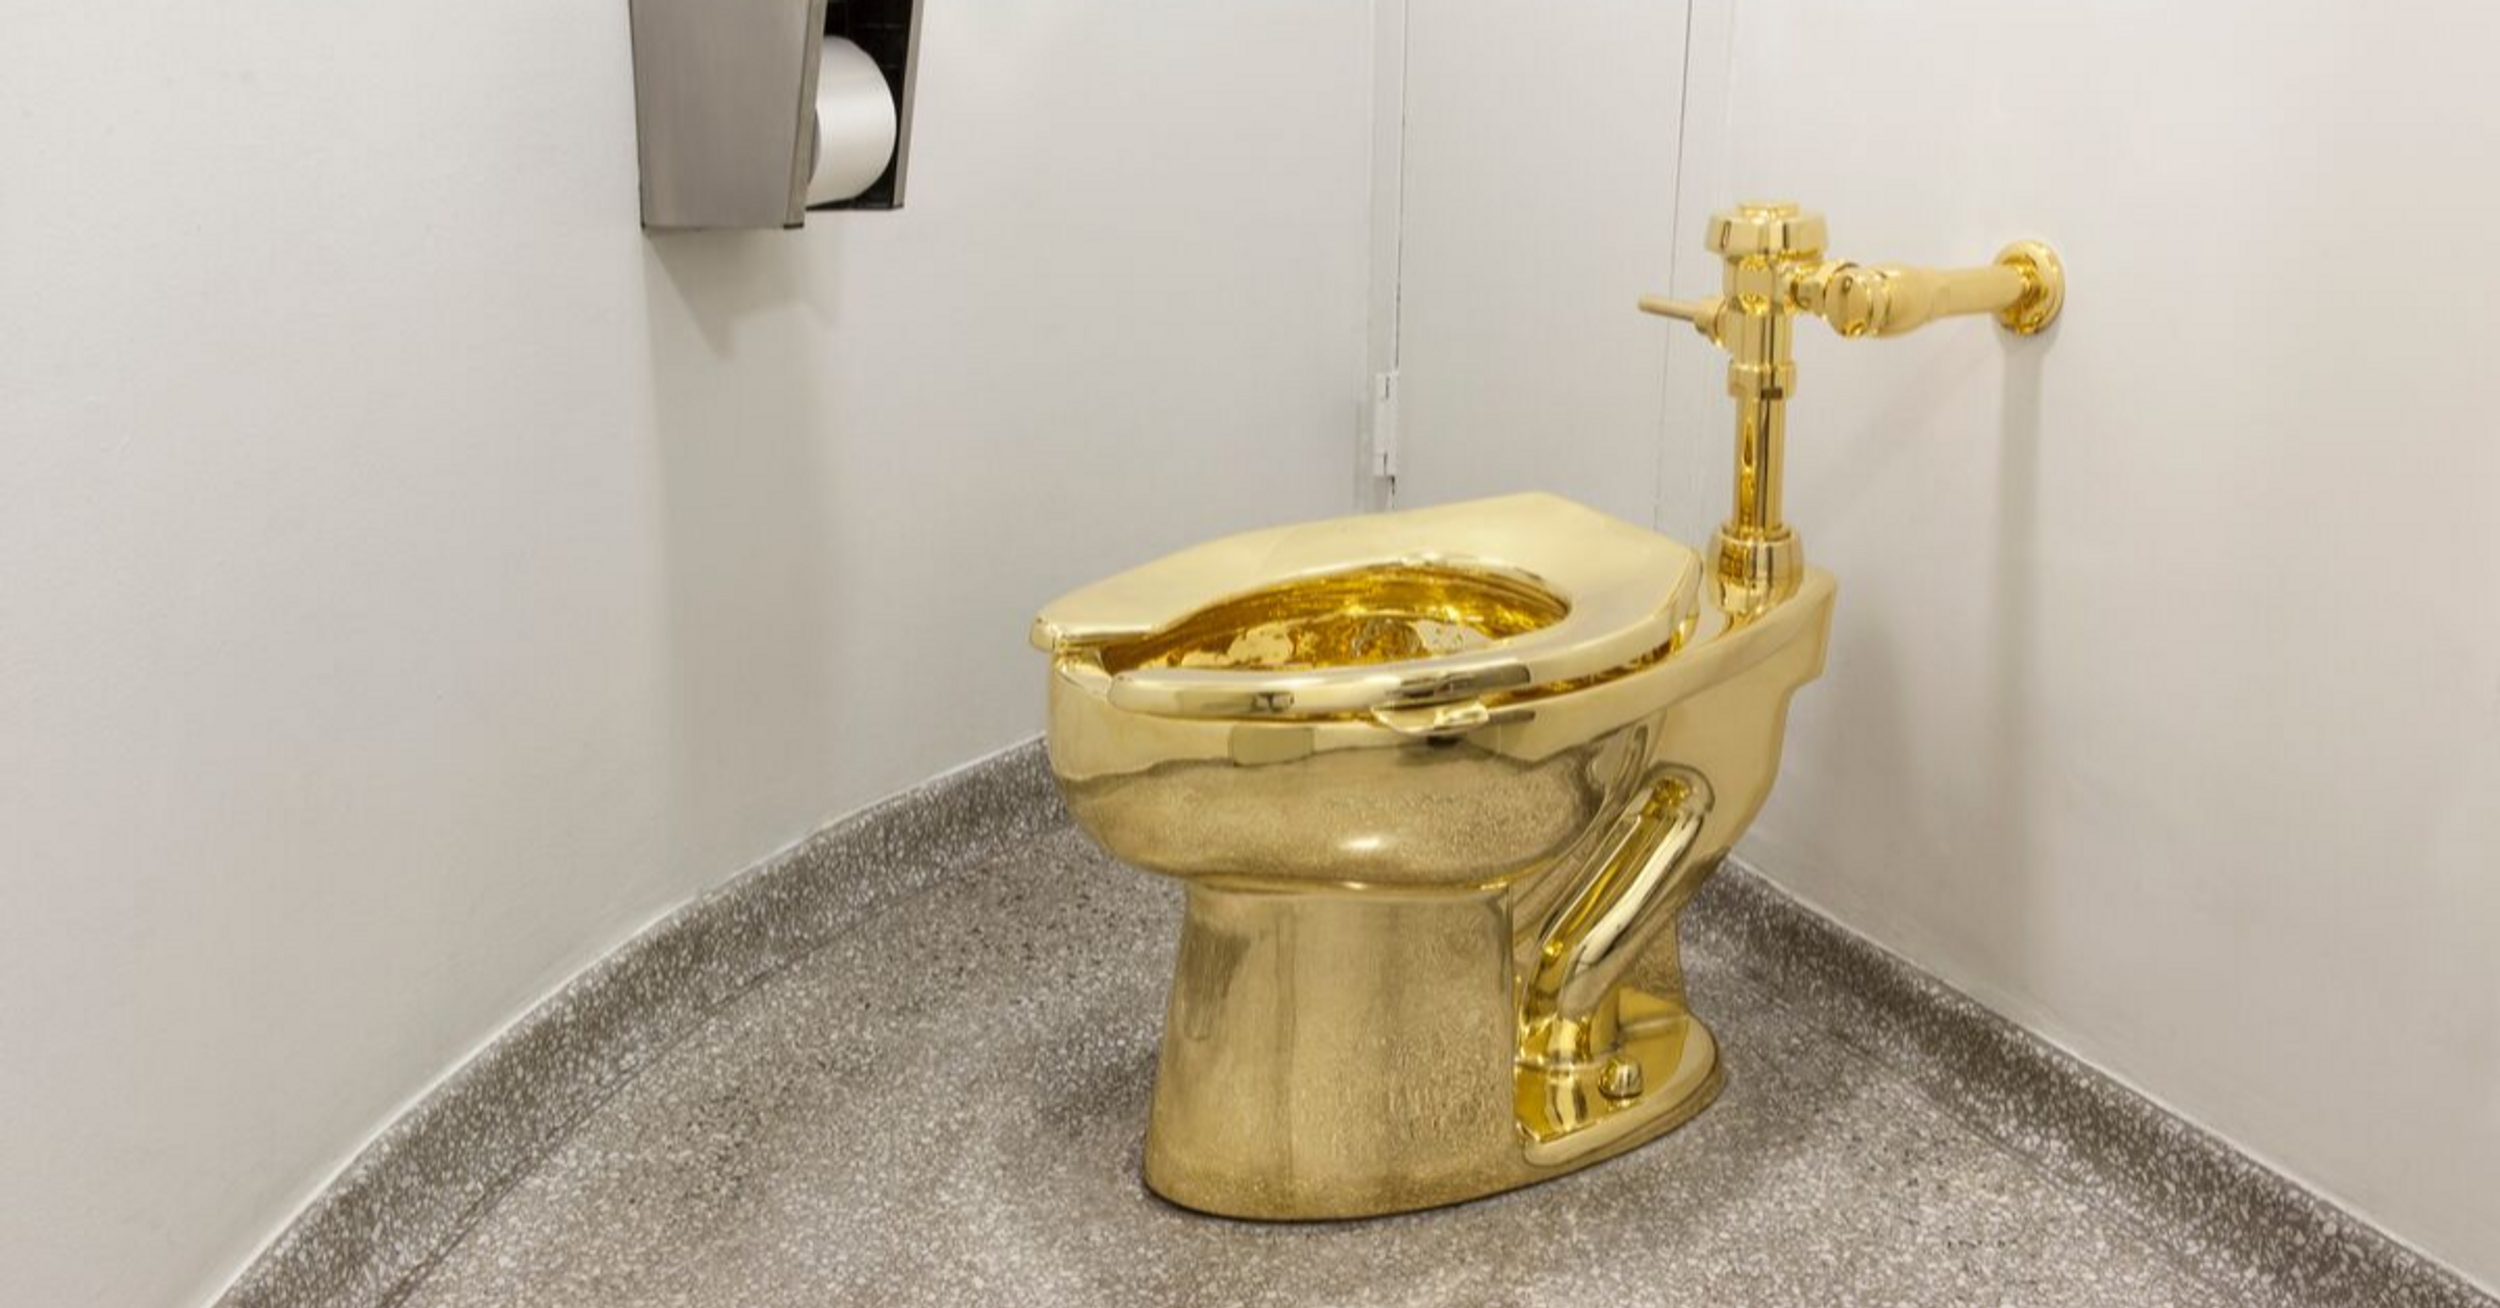 Police On The Hunt For Solid Gold Toilet After It Was Stolen From Winston Churchill's Birthplace